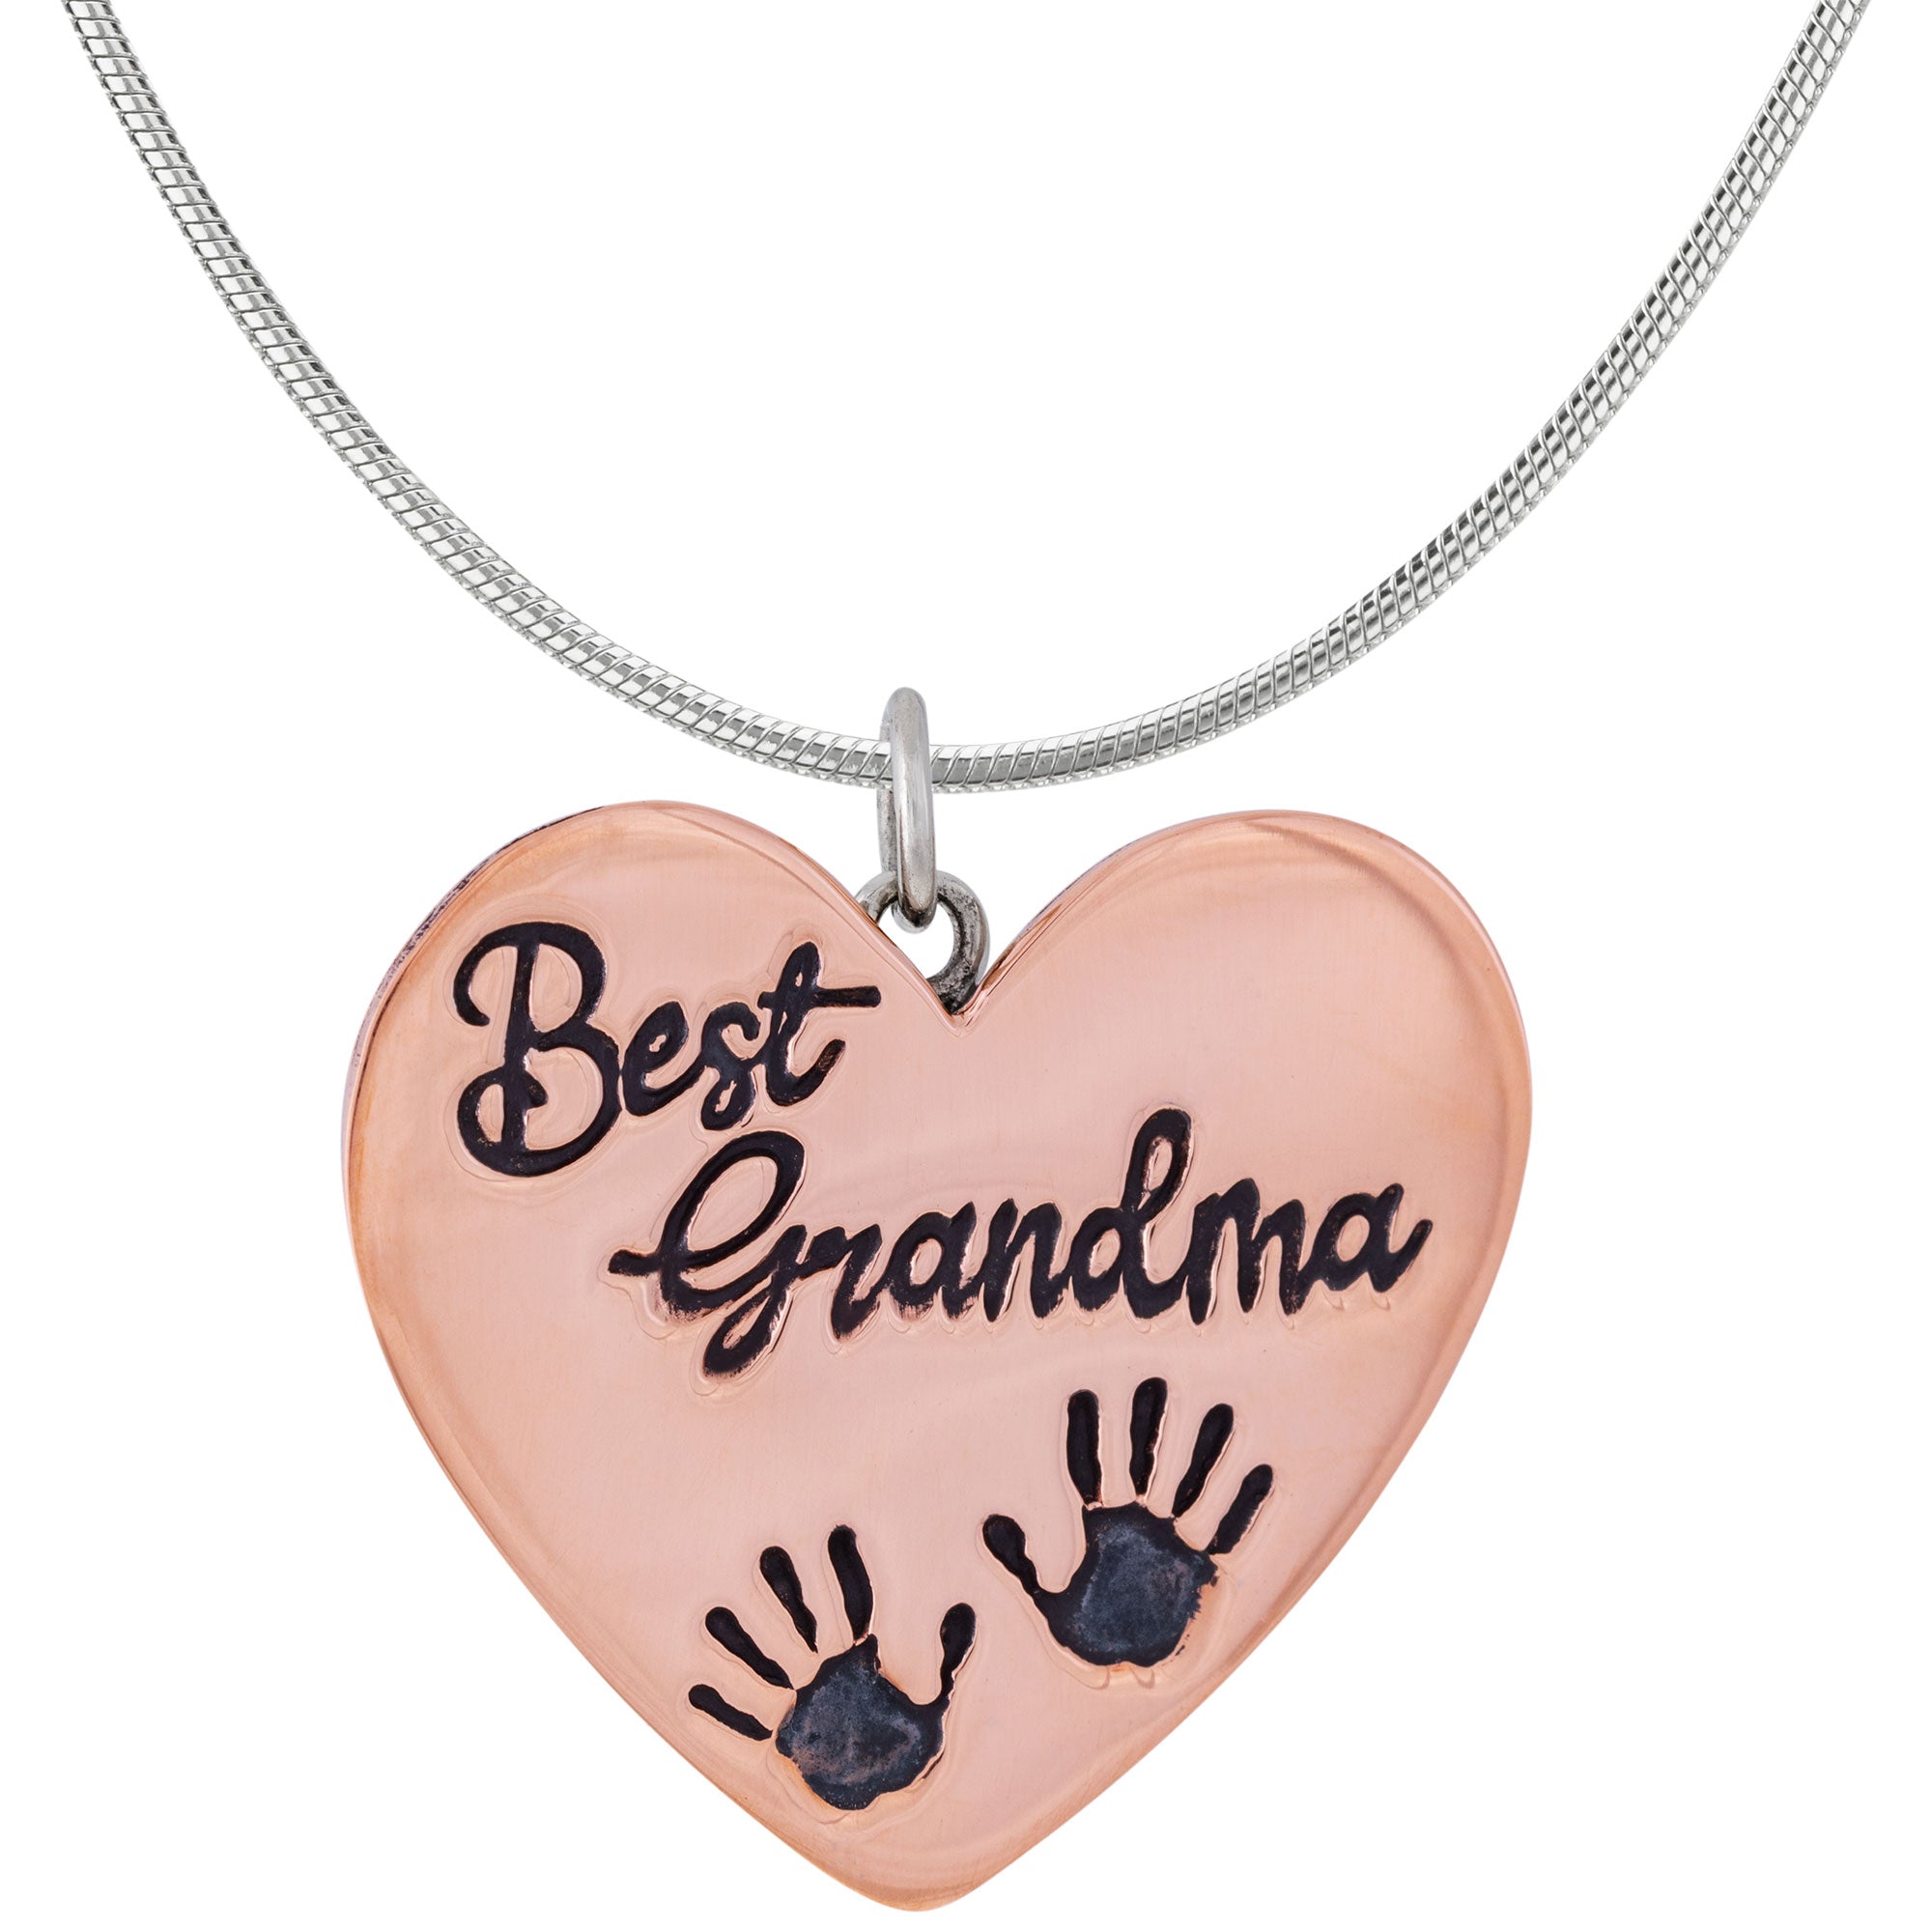 Best Grandma Mixed Metal Necklace - Hands - With Silver Plated Chain